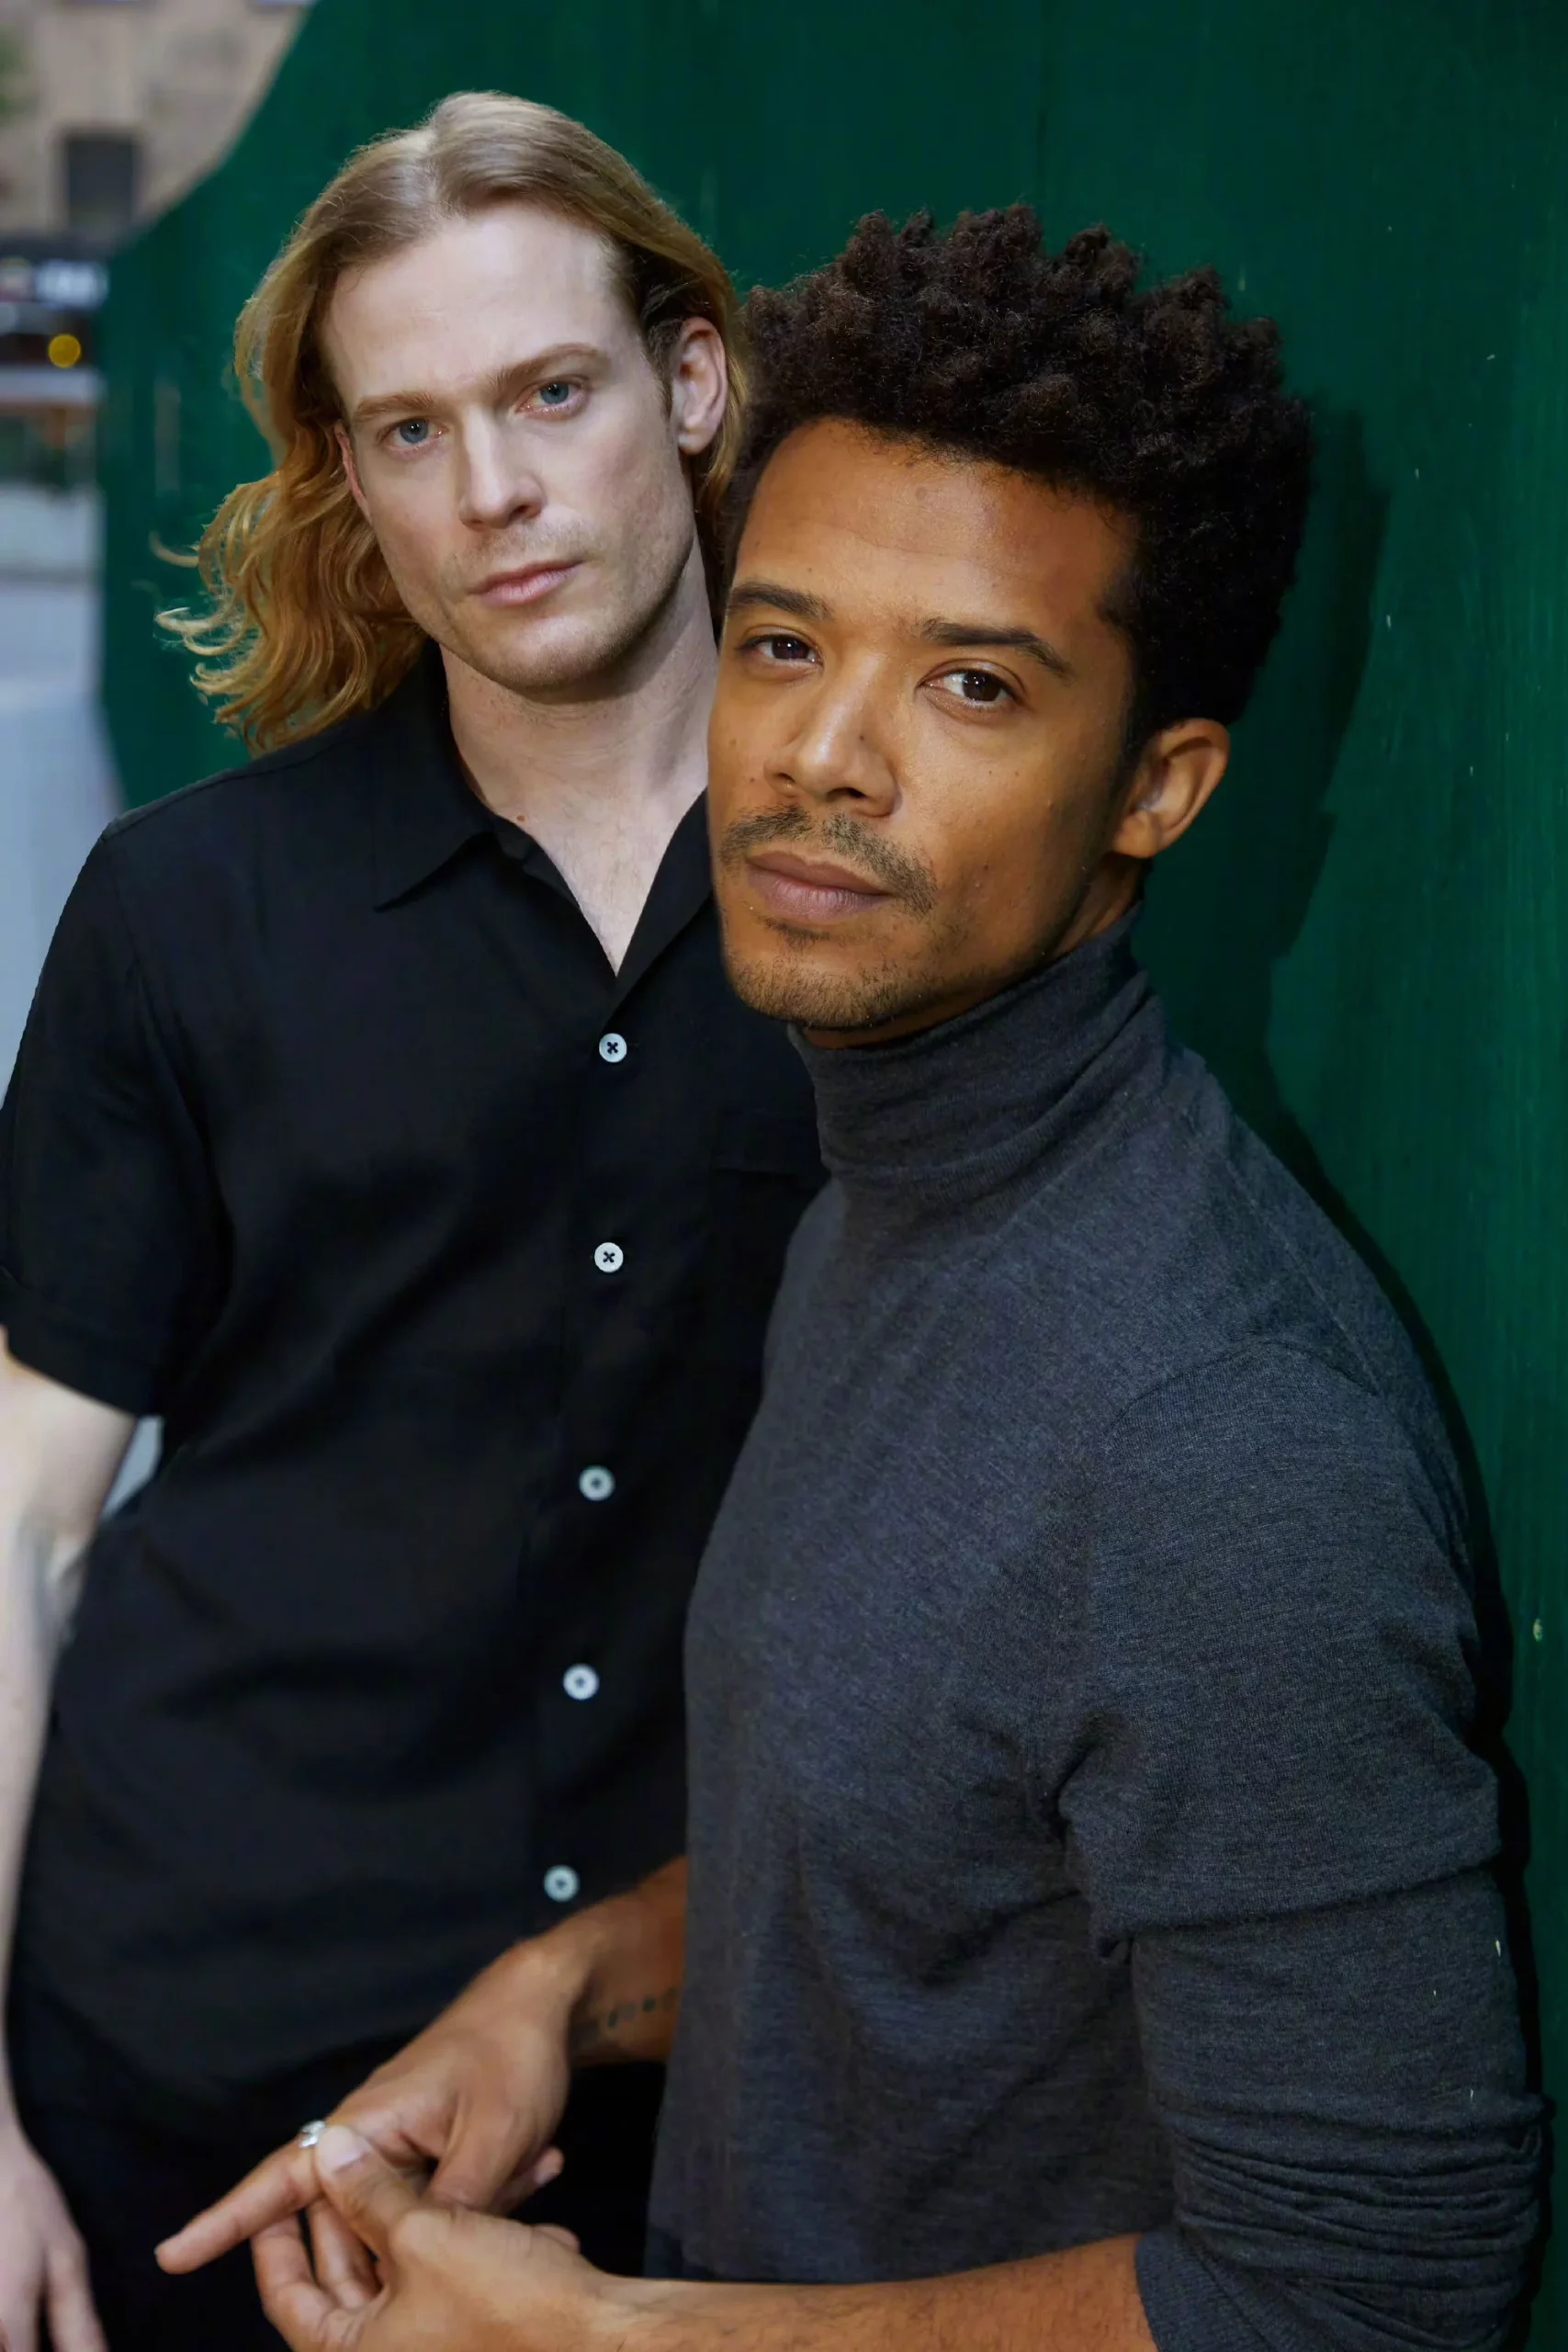 Drama version 'Interview with the Vampire' starring Sam Reid and Jacob Anderson, new photo for 'Esquire' magazine | FMV6